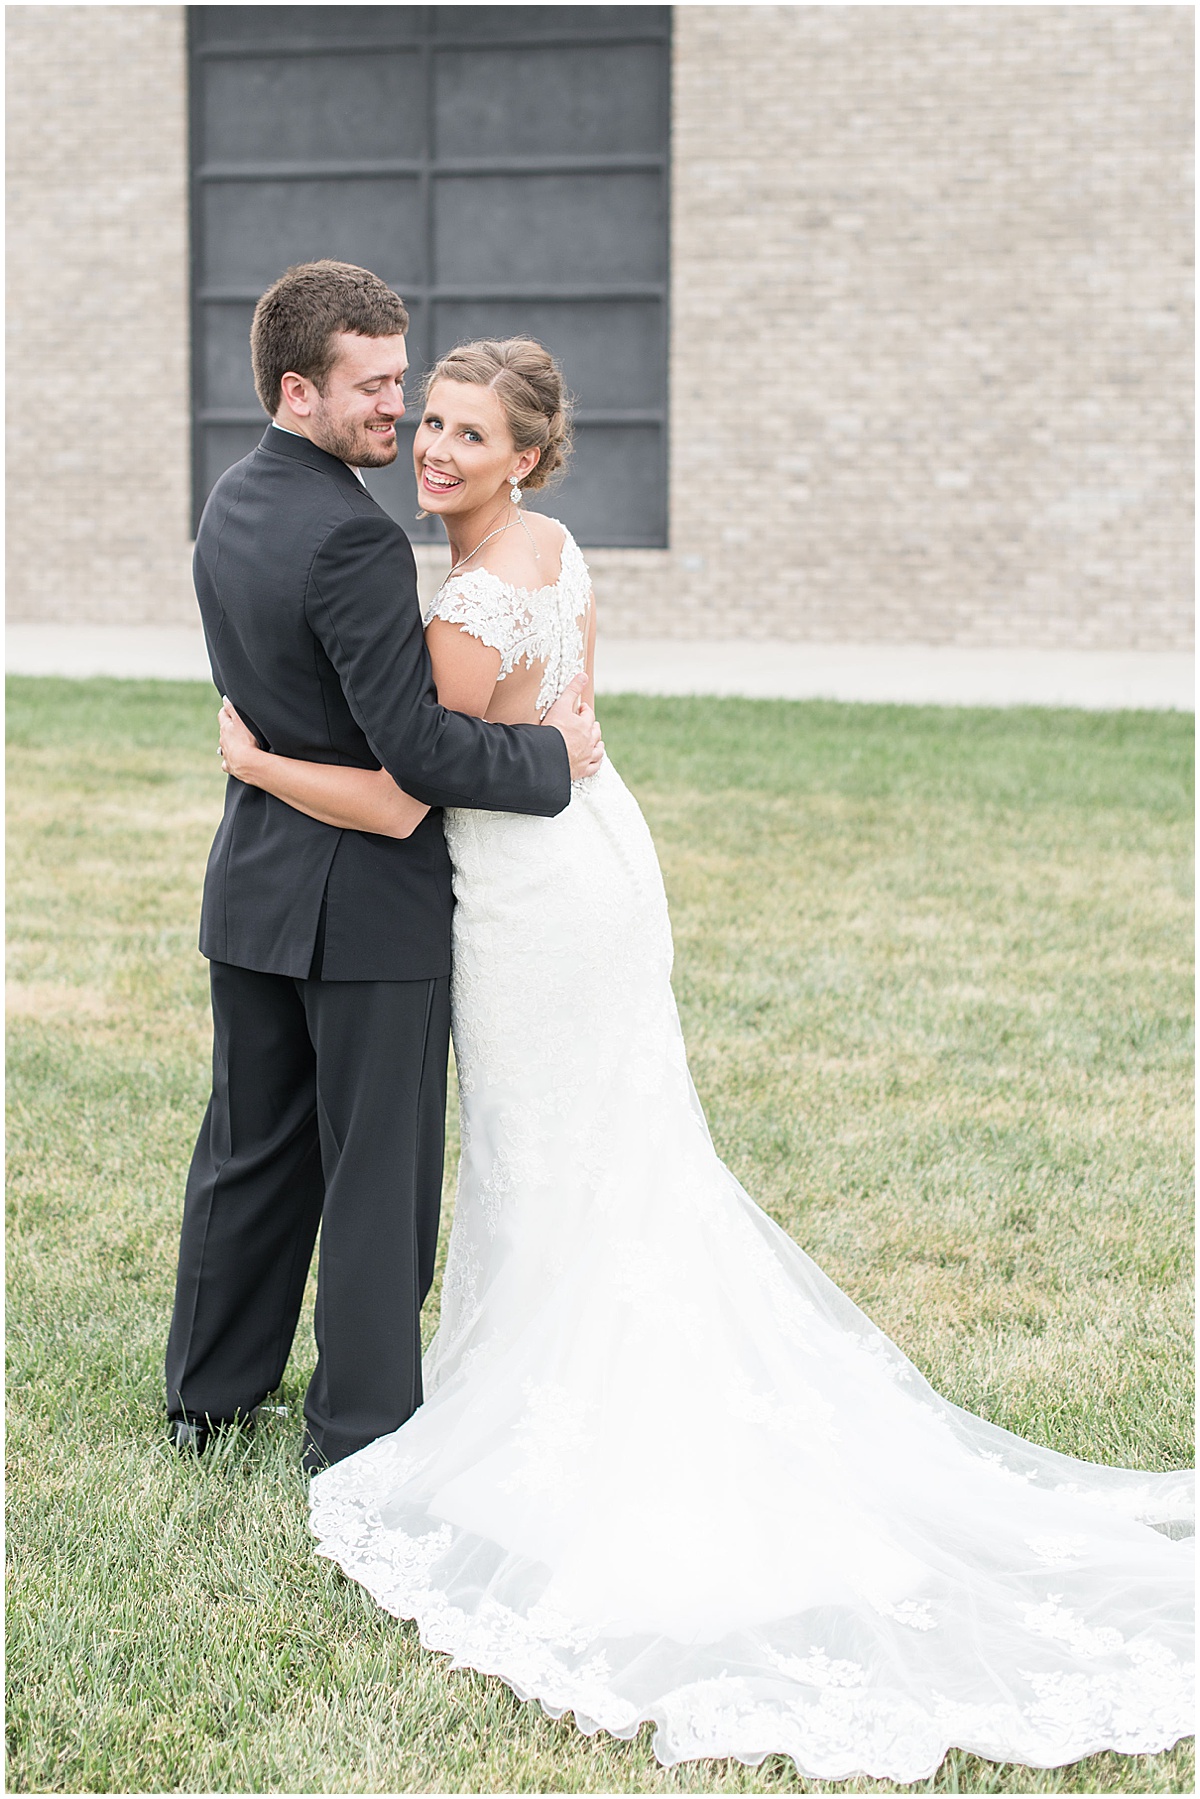 Just married photos after Bel Air Events wedding in Kokomo, Indiana by Victoria Rayburn Photography